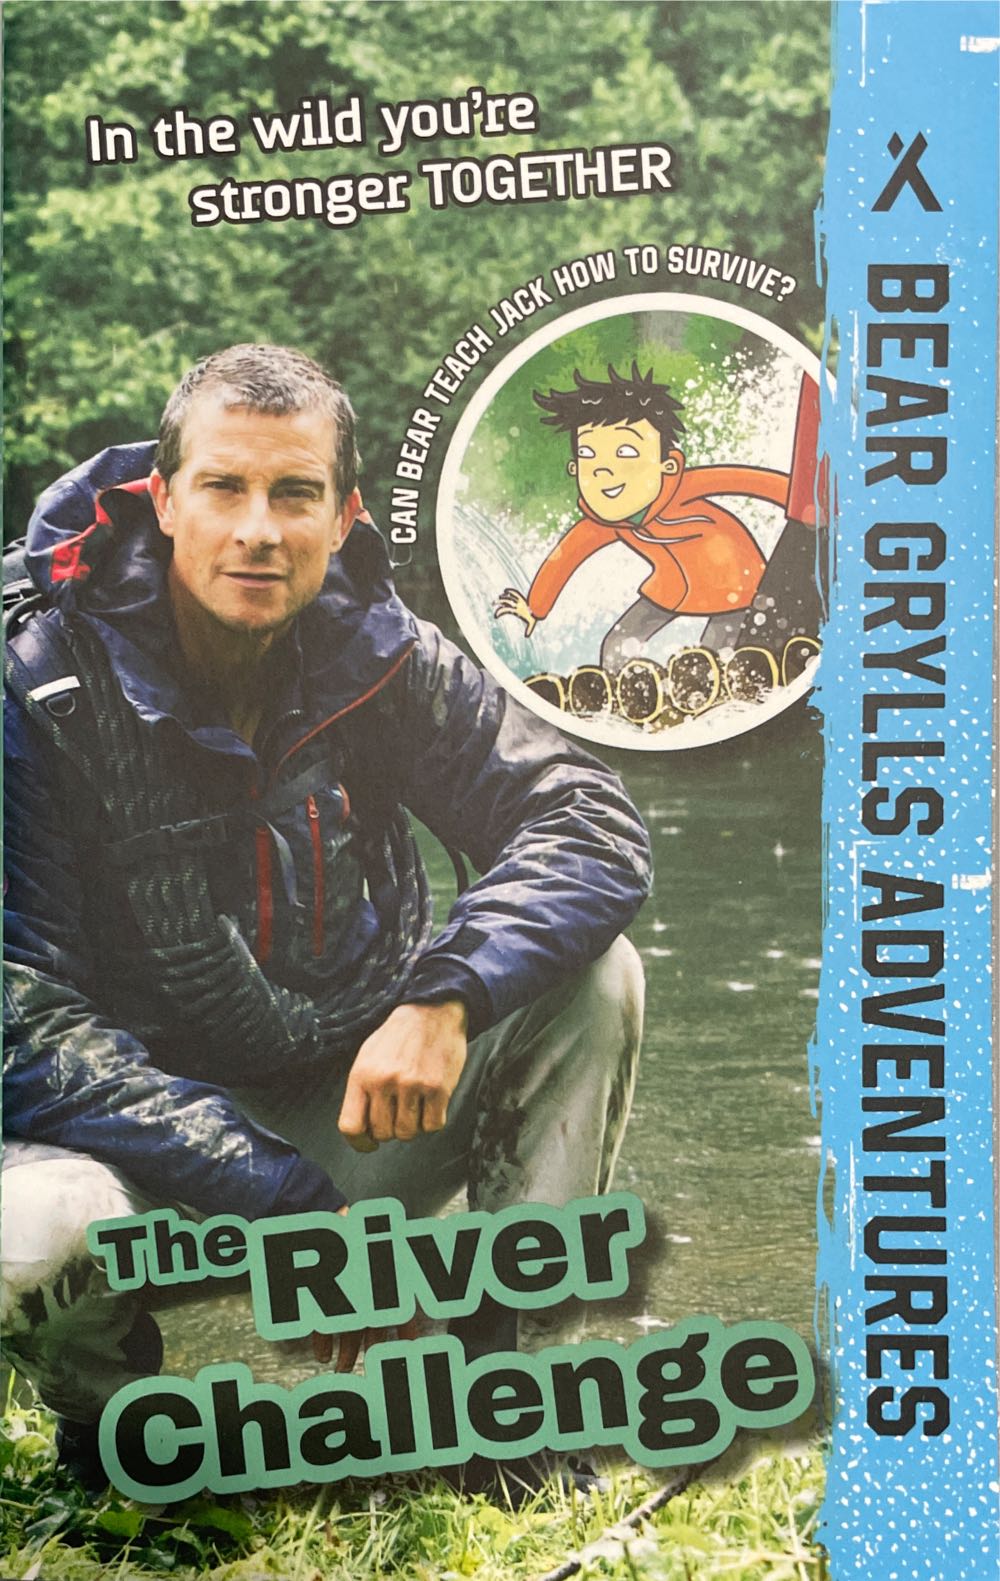 Bear Grylls: The River Challenge - Bear Grylls book collectible [Barcode 9781684640966] - Main Image 1